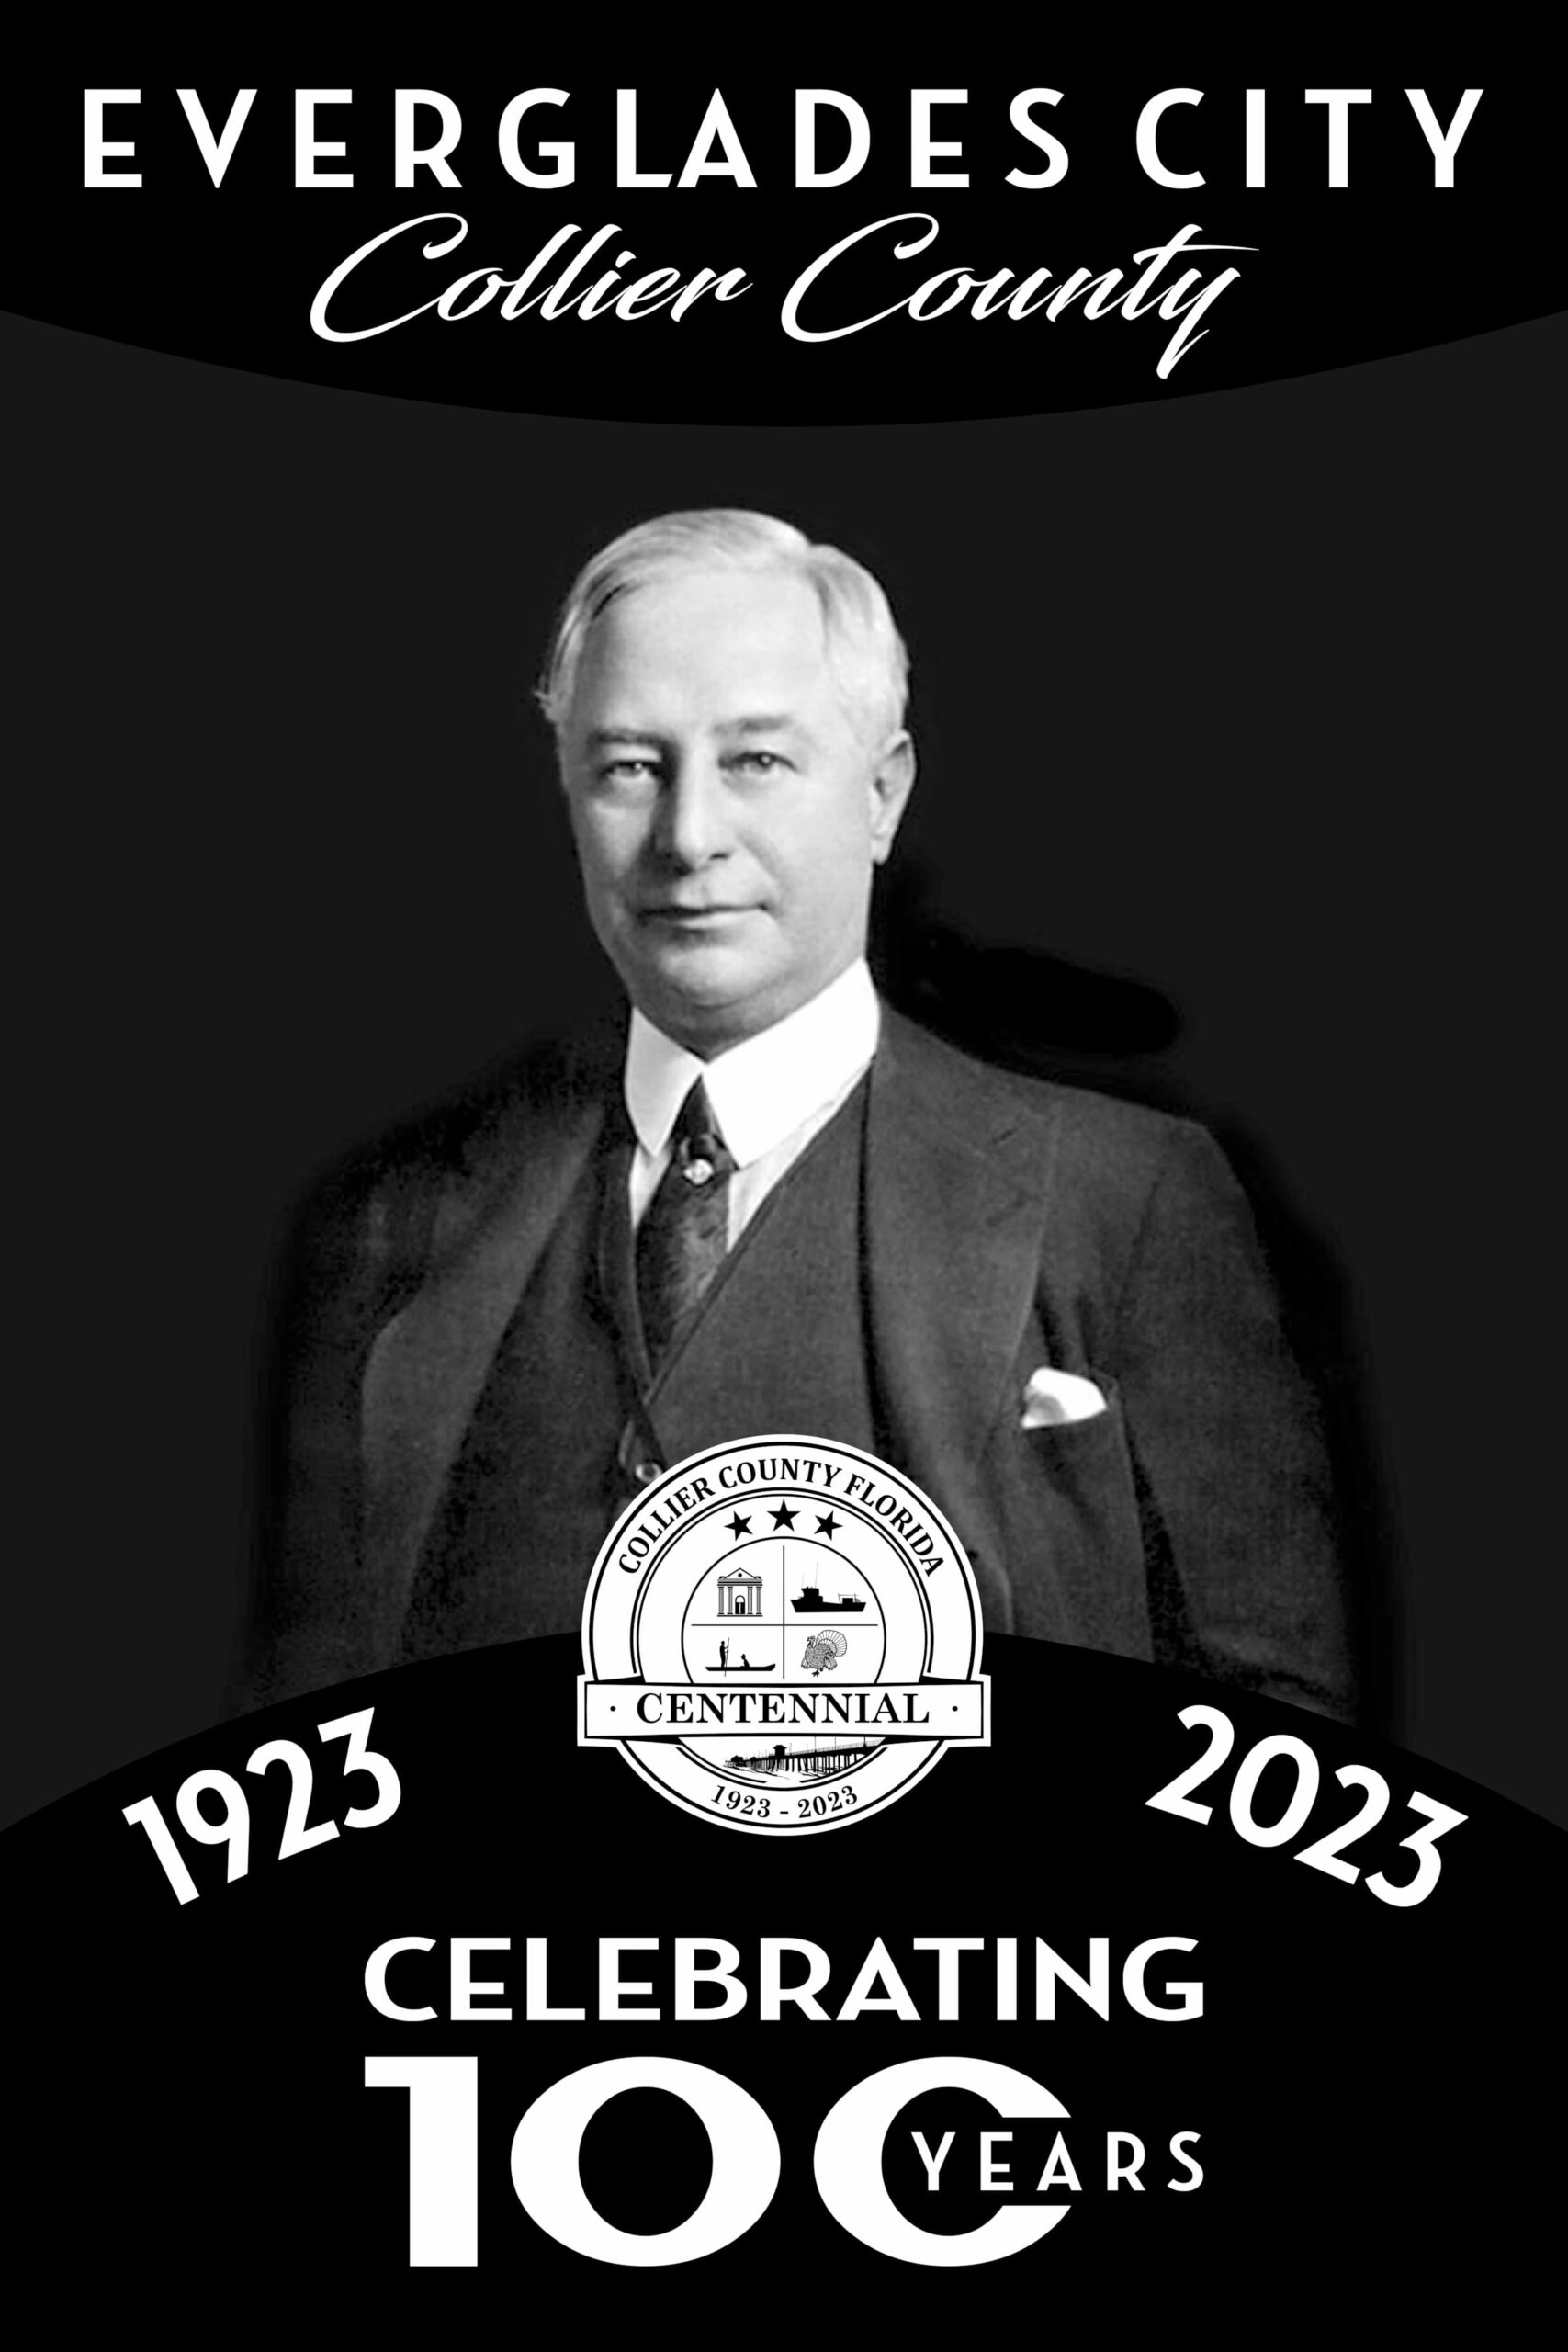 A historical photograph depicts a man in a tailored suit. The image says "1923, 2023 - Celebrating 100 Years"